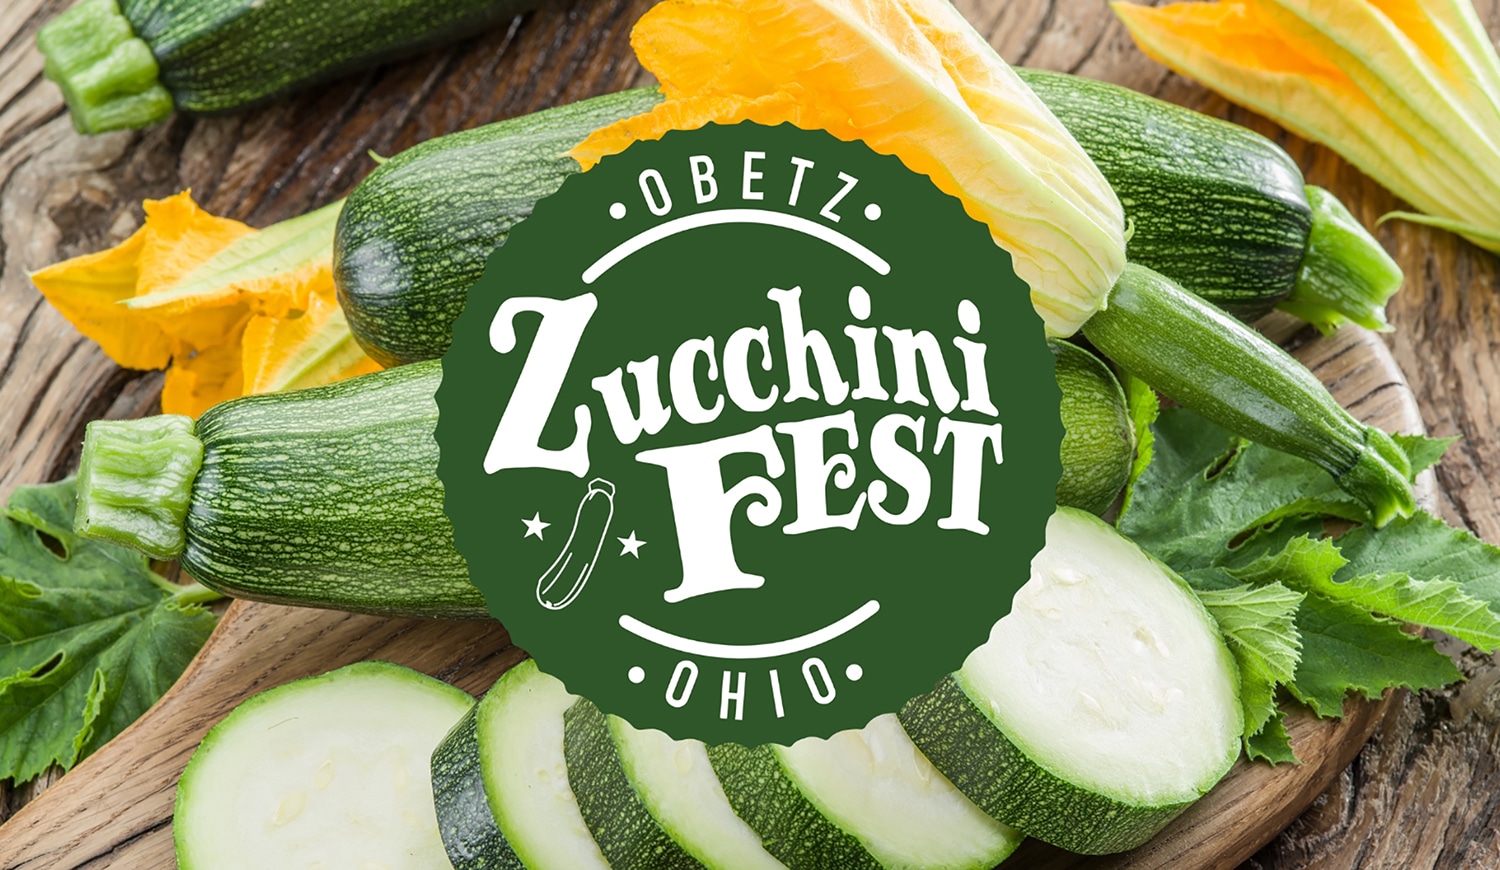 horizontal image of the obetz zucchini fest logo with a selection of whole and sliced zucchinis behind it